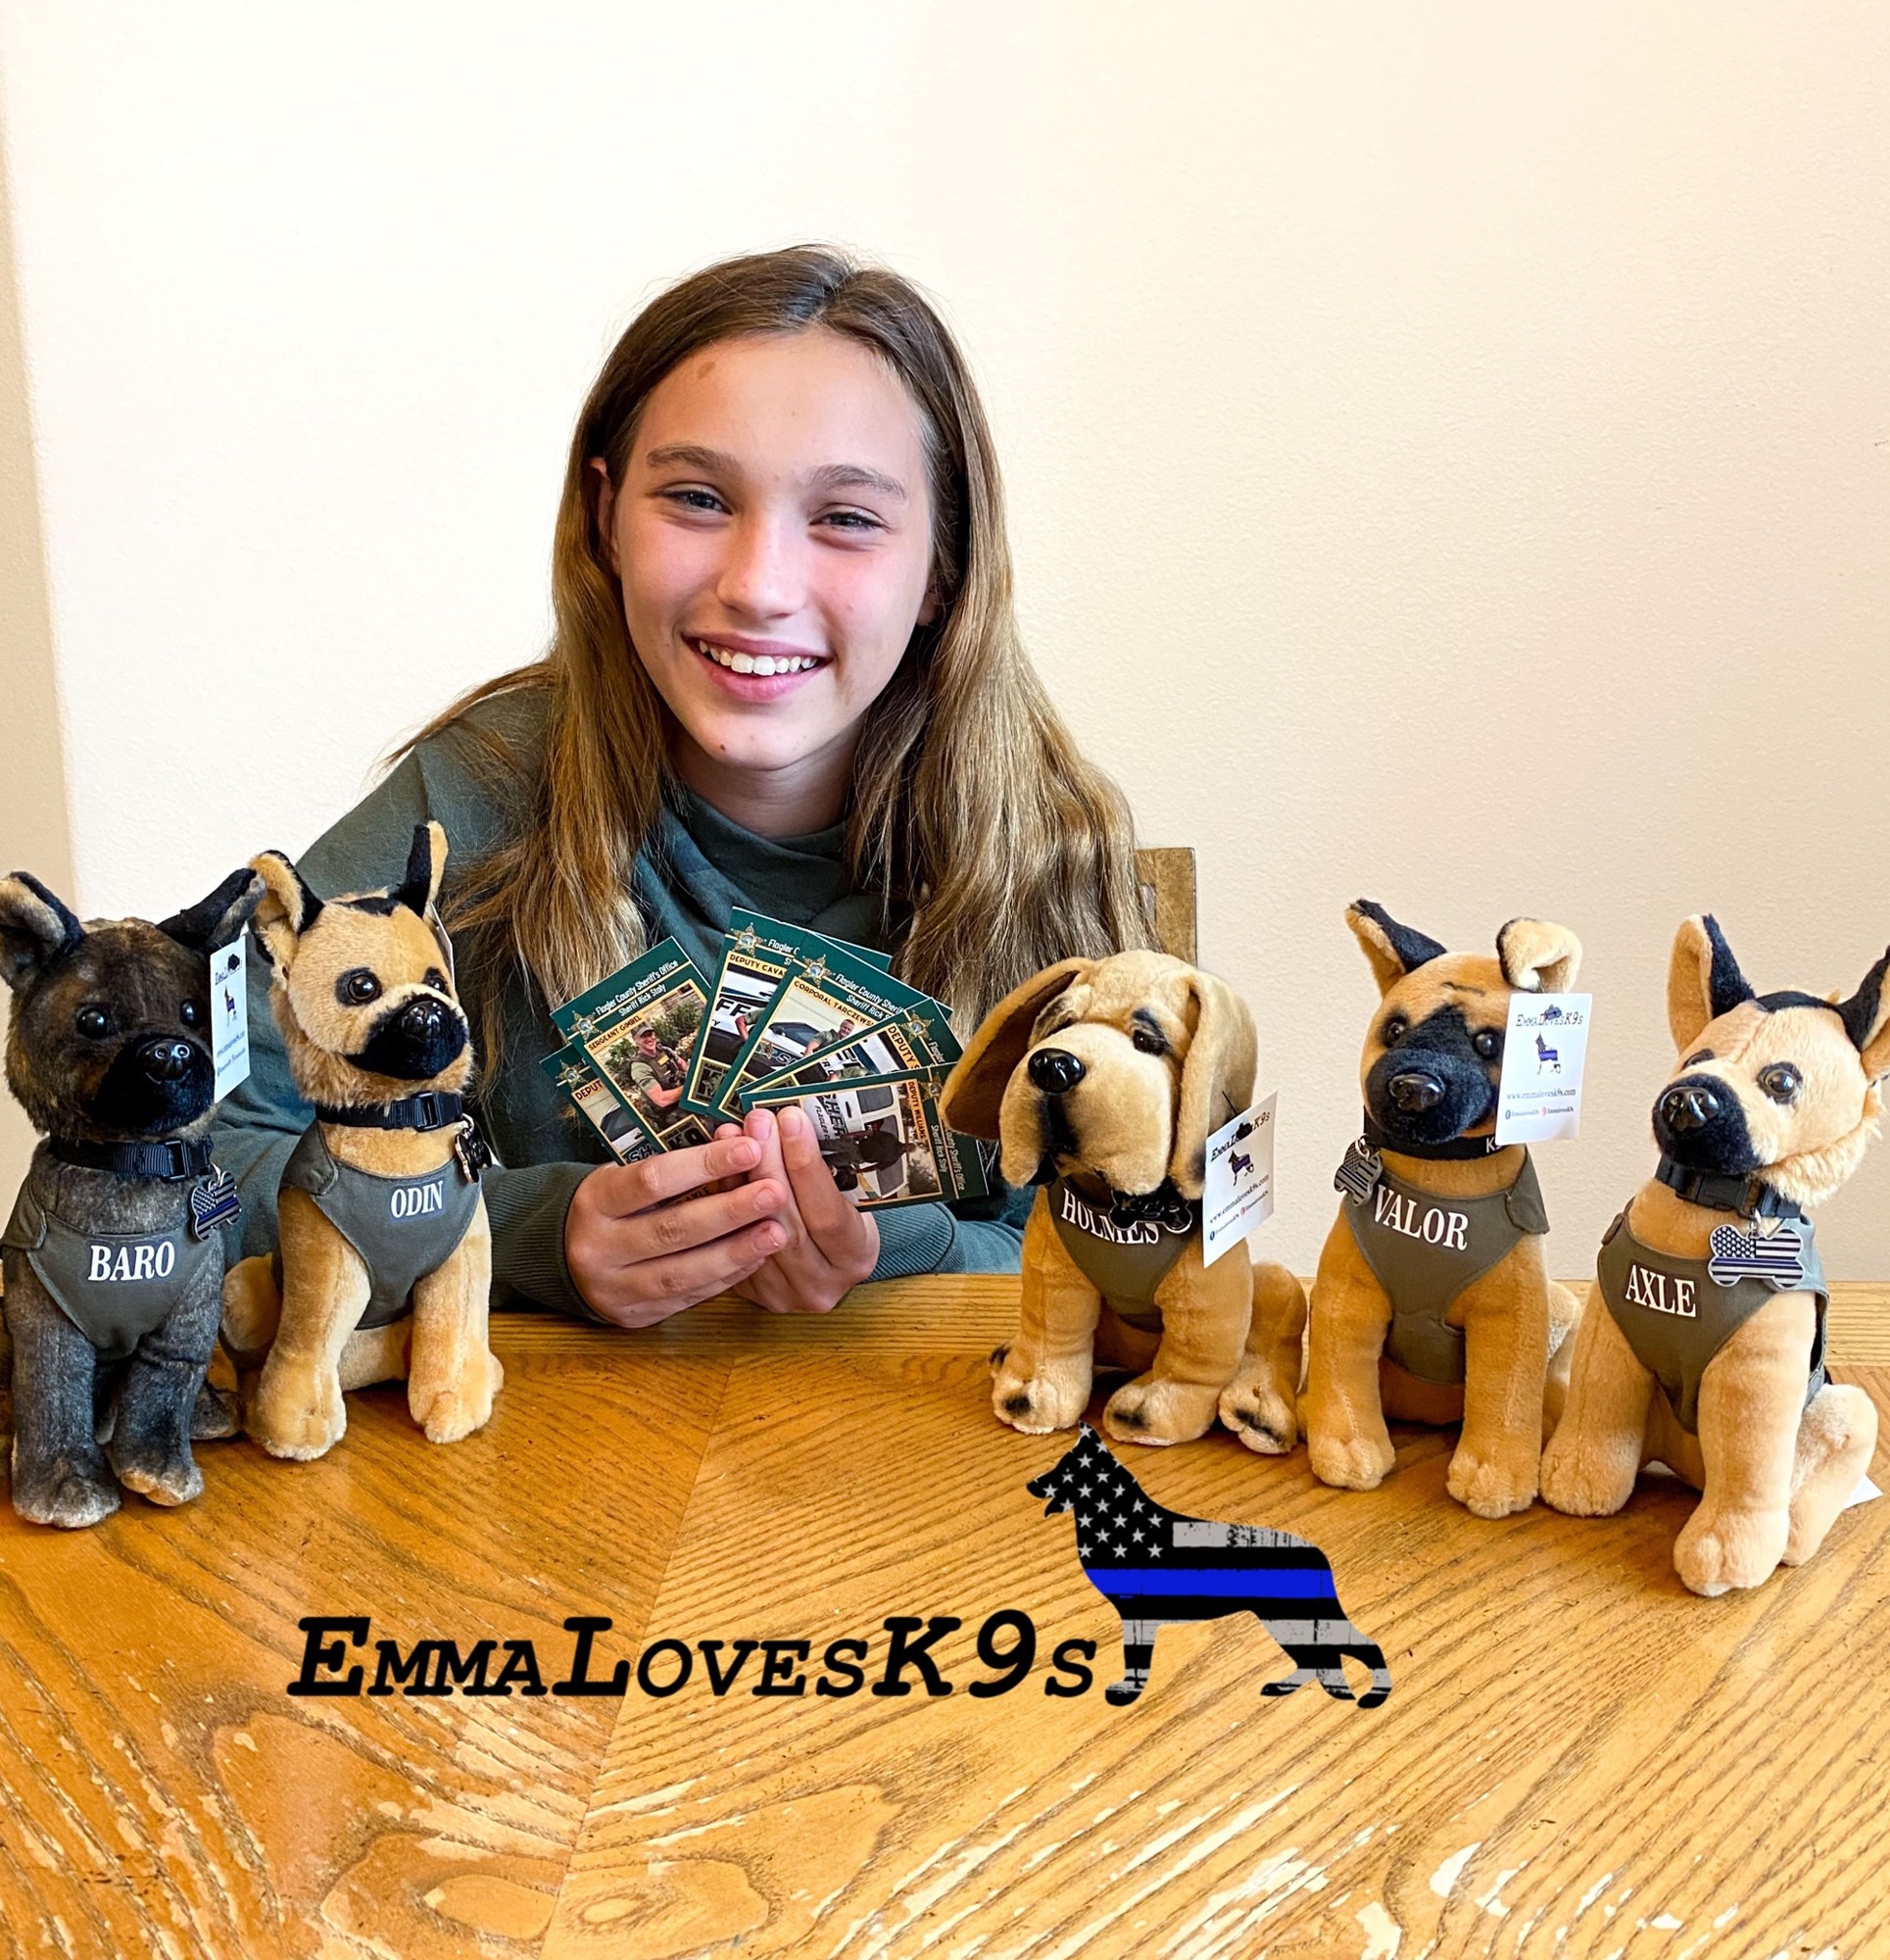 You can also receive a FCSO K-9 trading card by purchasing a plushy from EmmaLovesK9s.com.